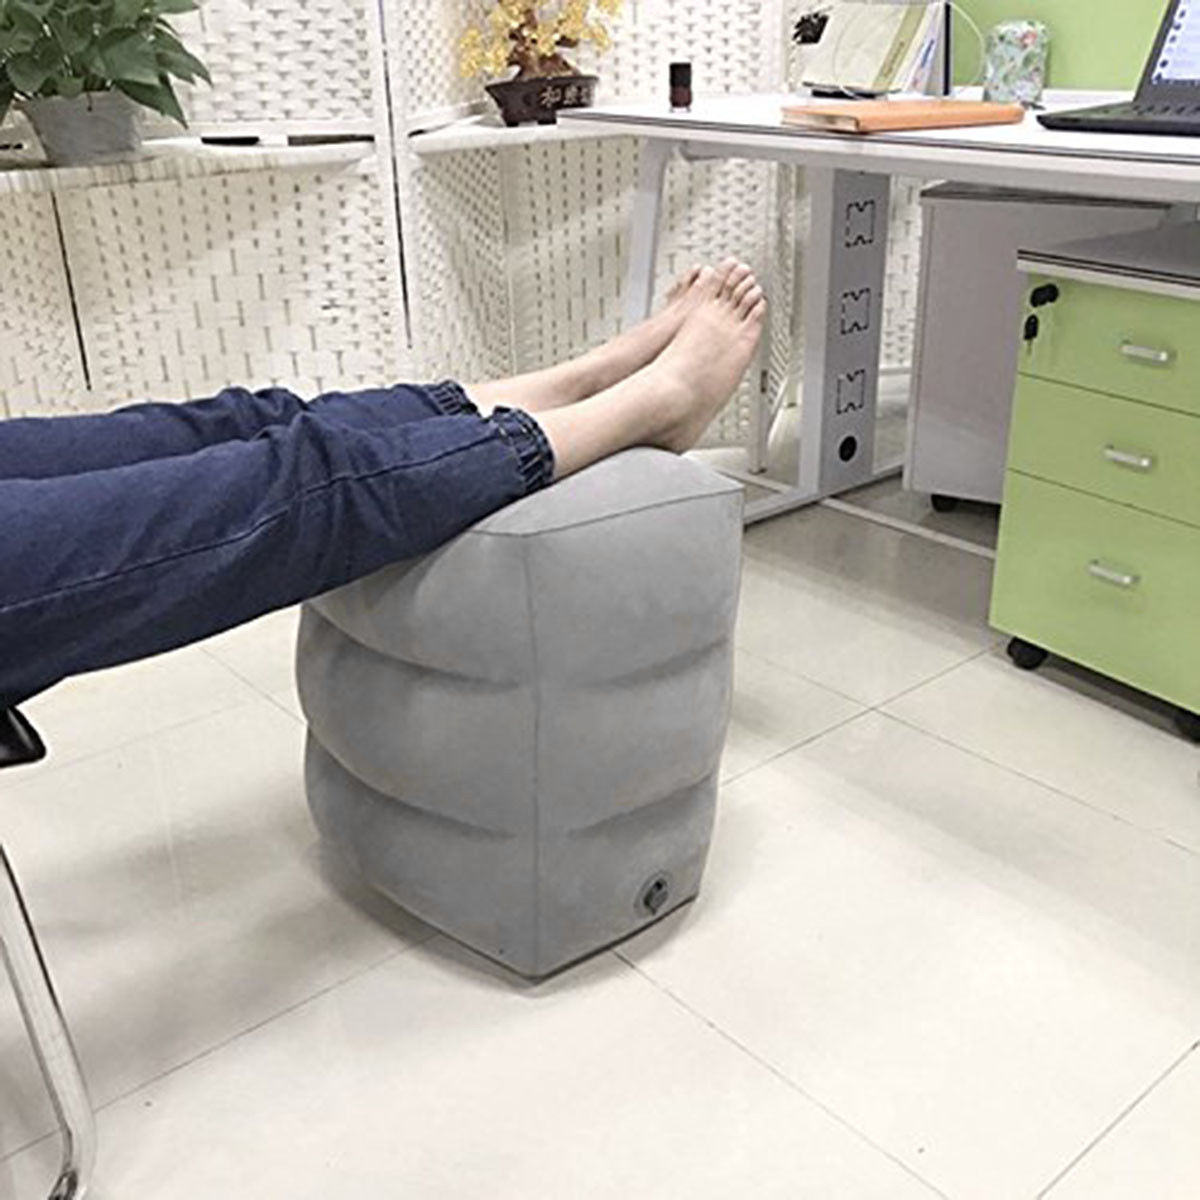 Inflatable Foot Rest Travel Cushion